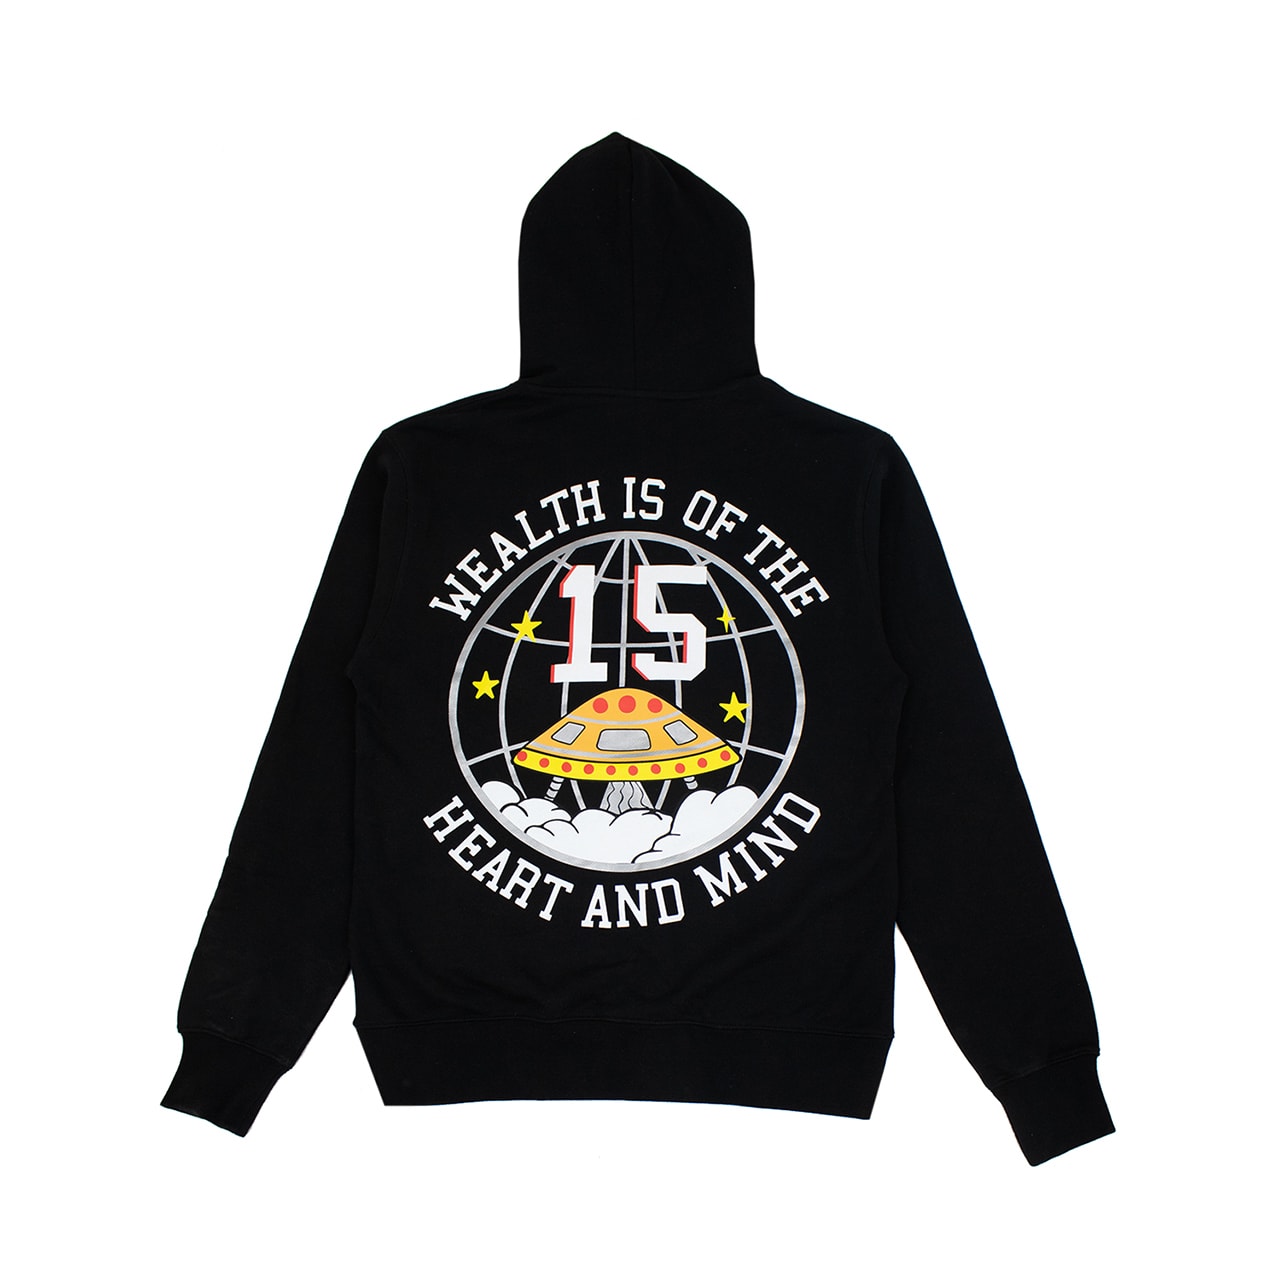 BBC 15-Year Anniversary Capsule Collection